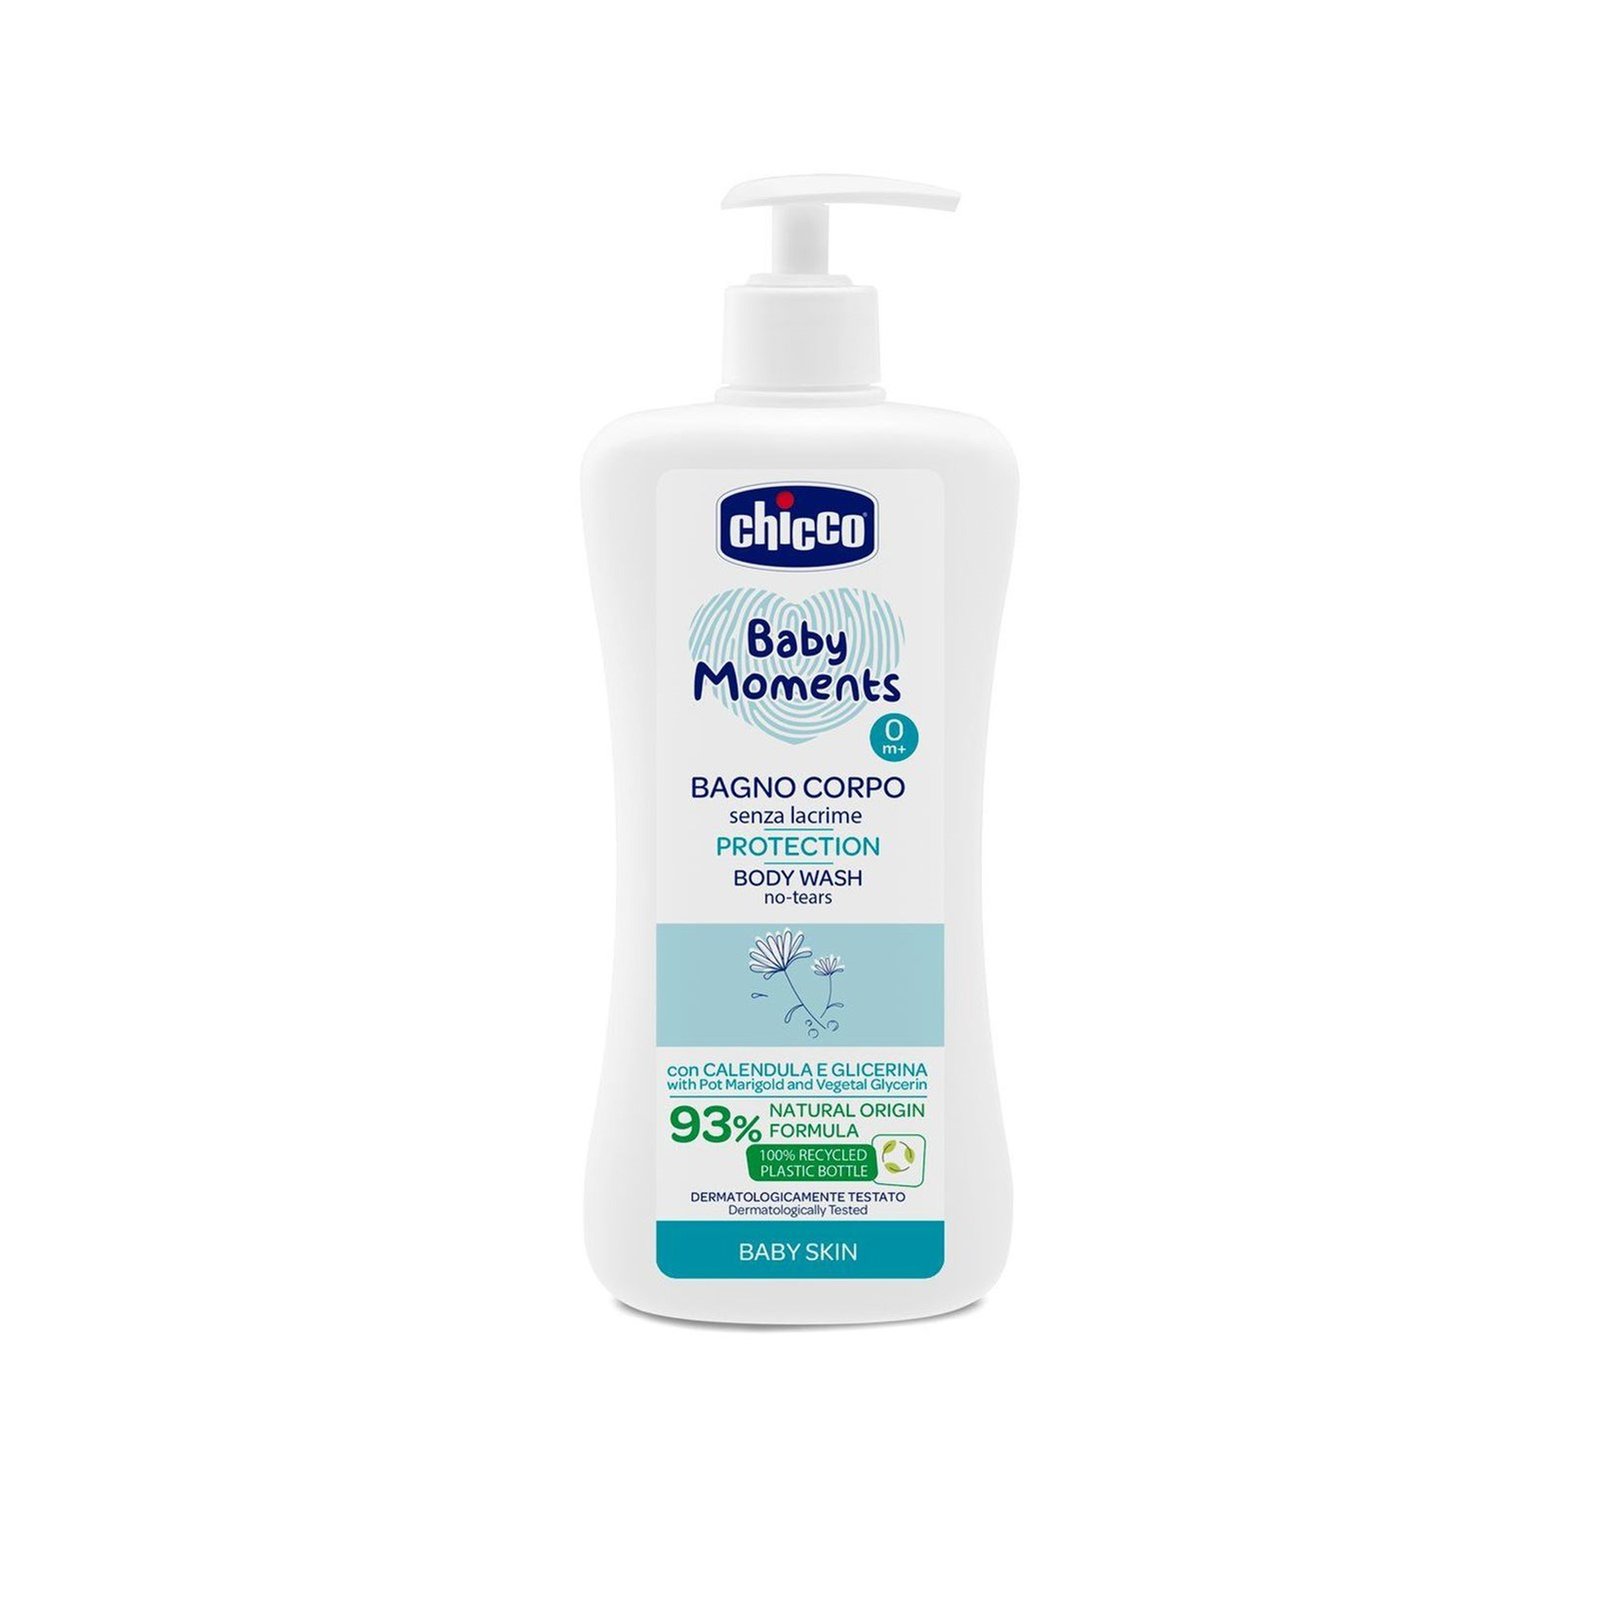 Chicco Baby Moments Protection No-Tears Body Wash 0m+ 500ml (16.9 fl oz)